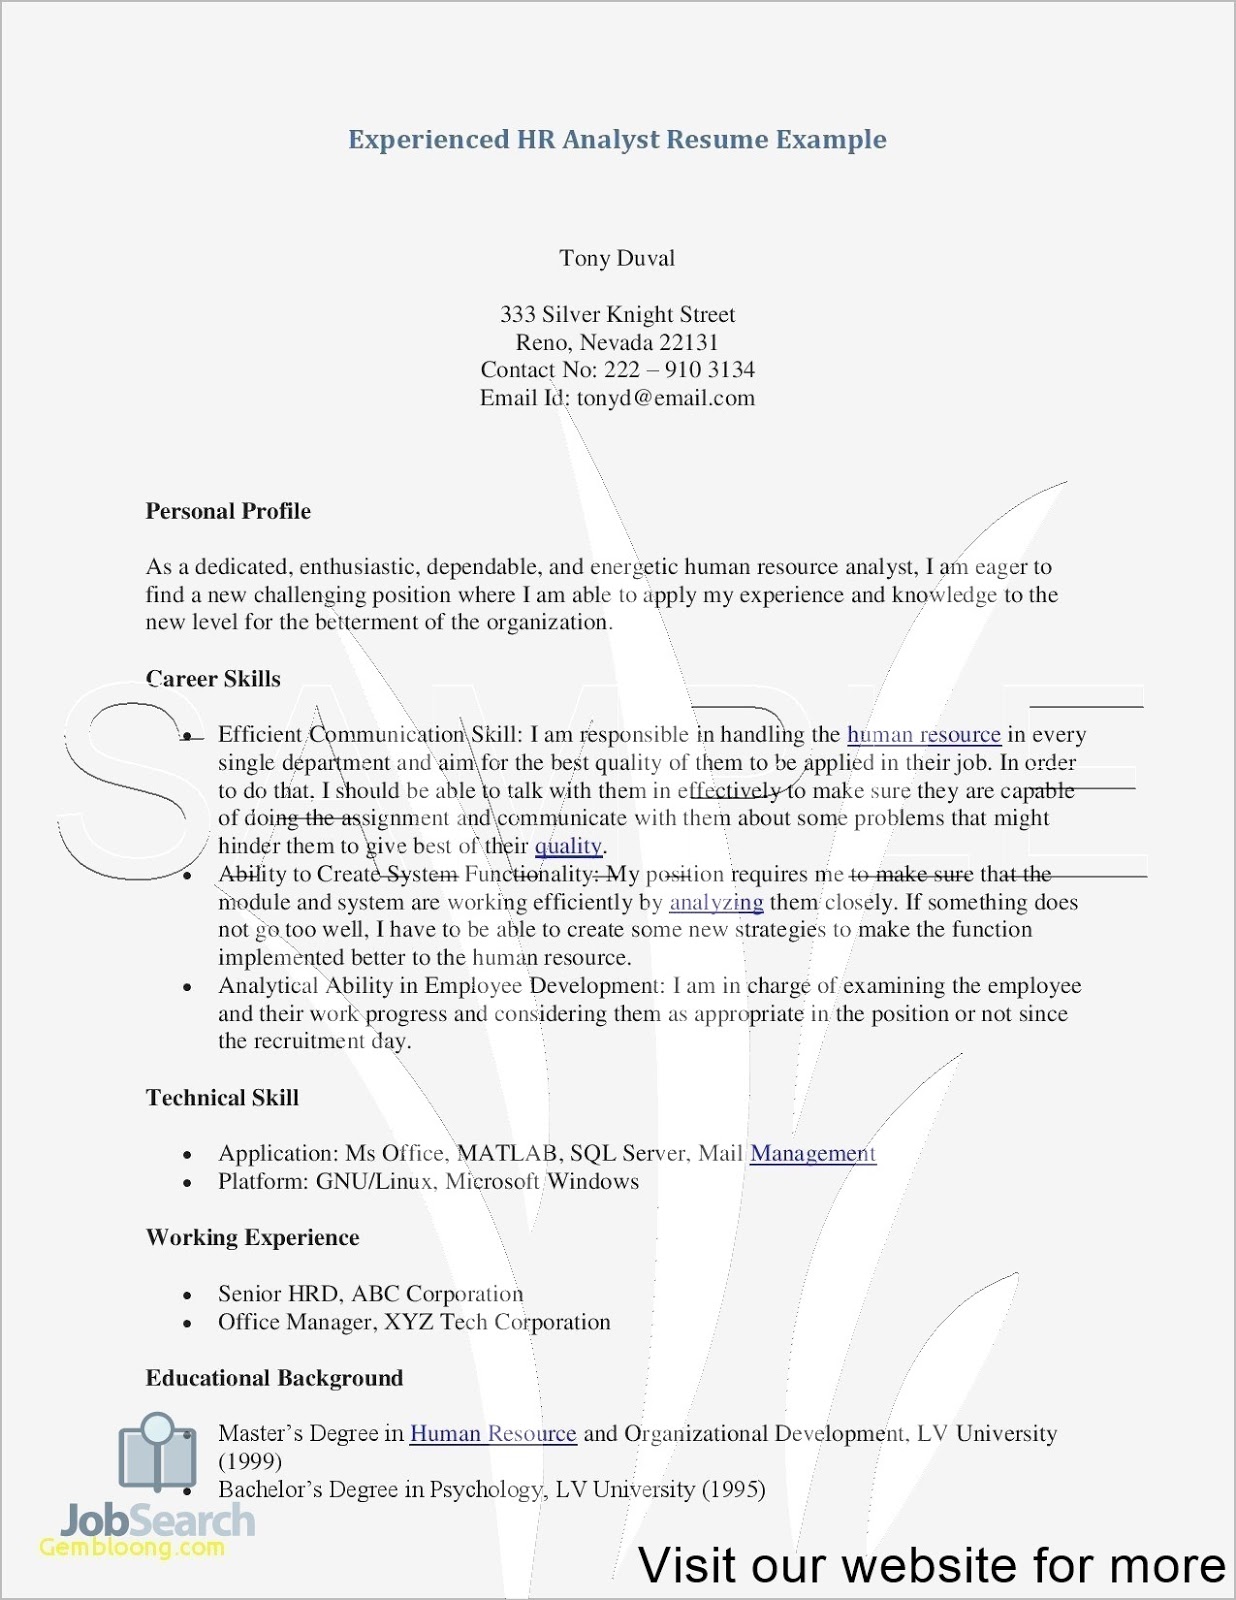 office administrator resume sample office administrator curriculum vitae sample office administrator resume example 